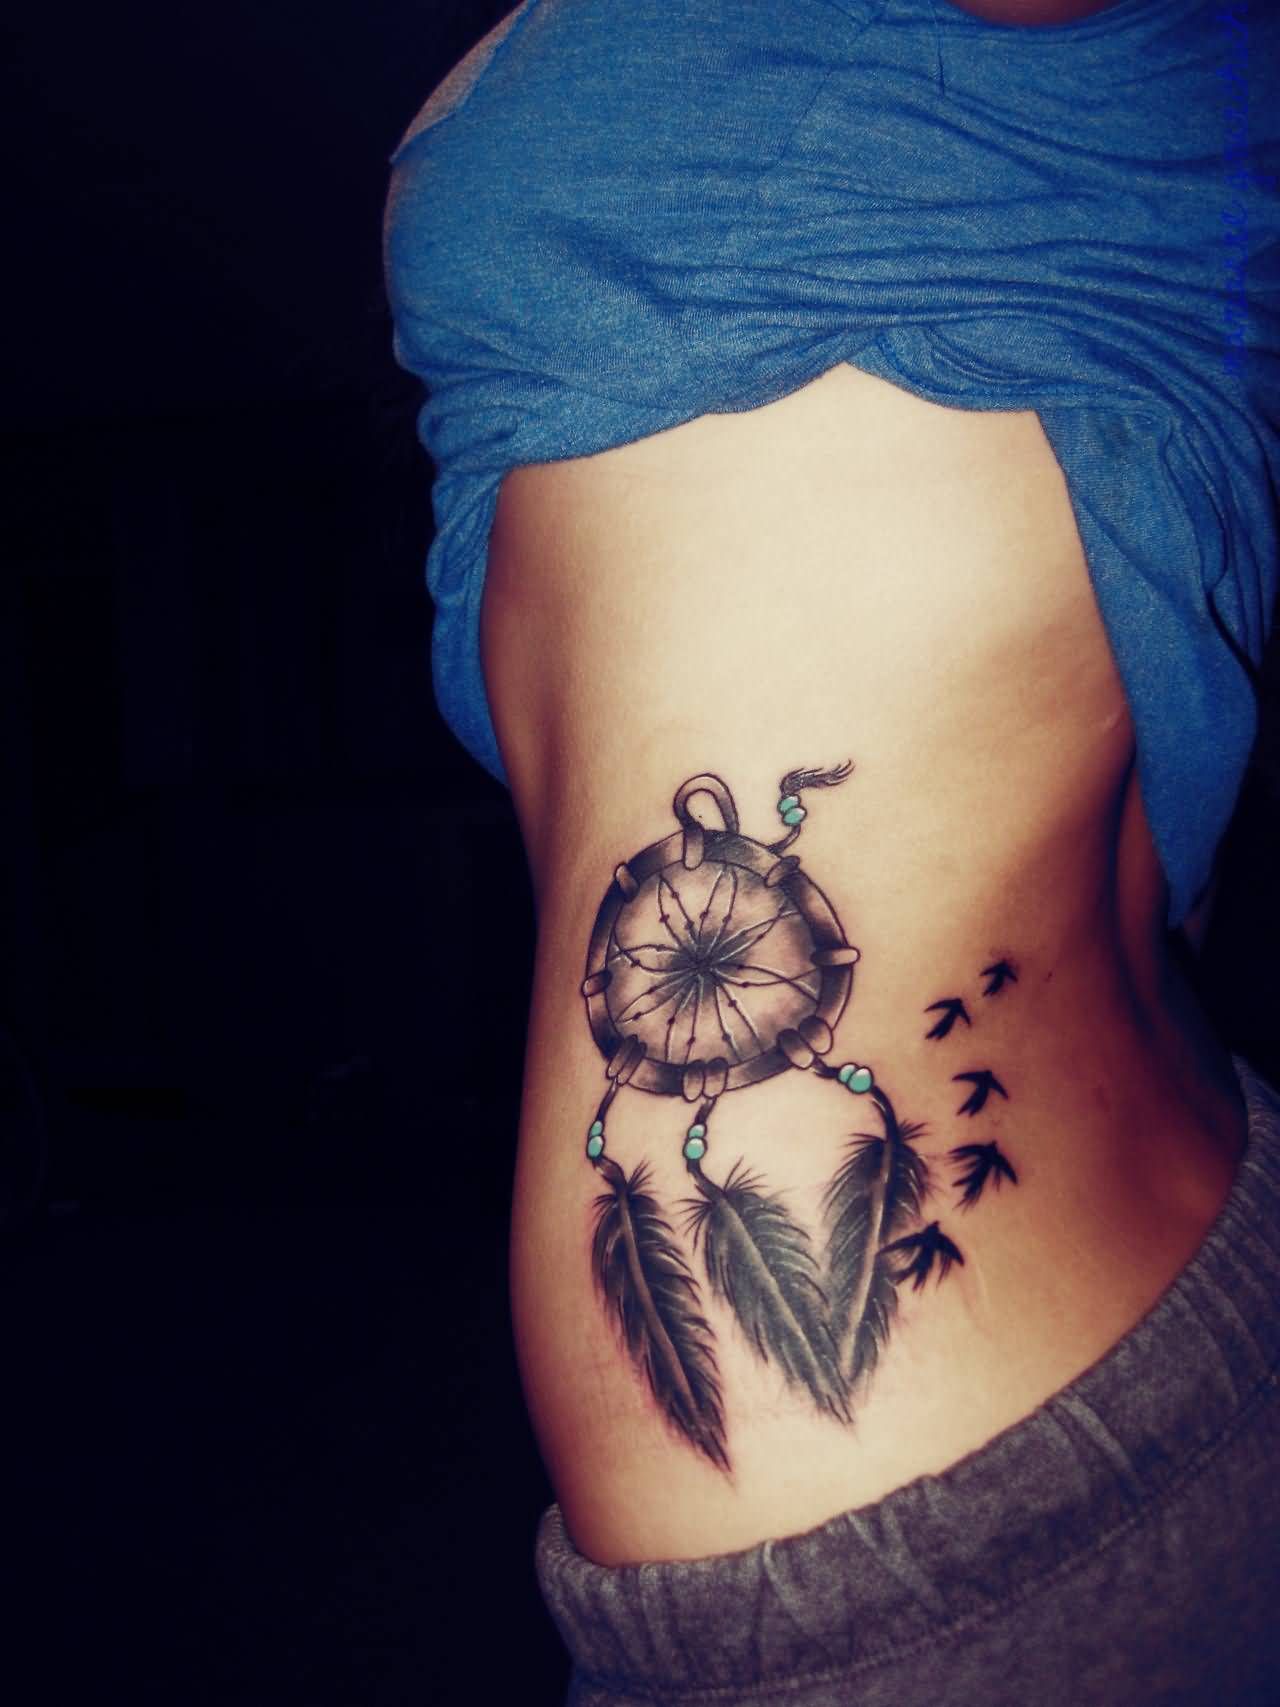 Flying Birds And Dreamcatcher Tattoo On Side